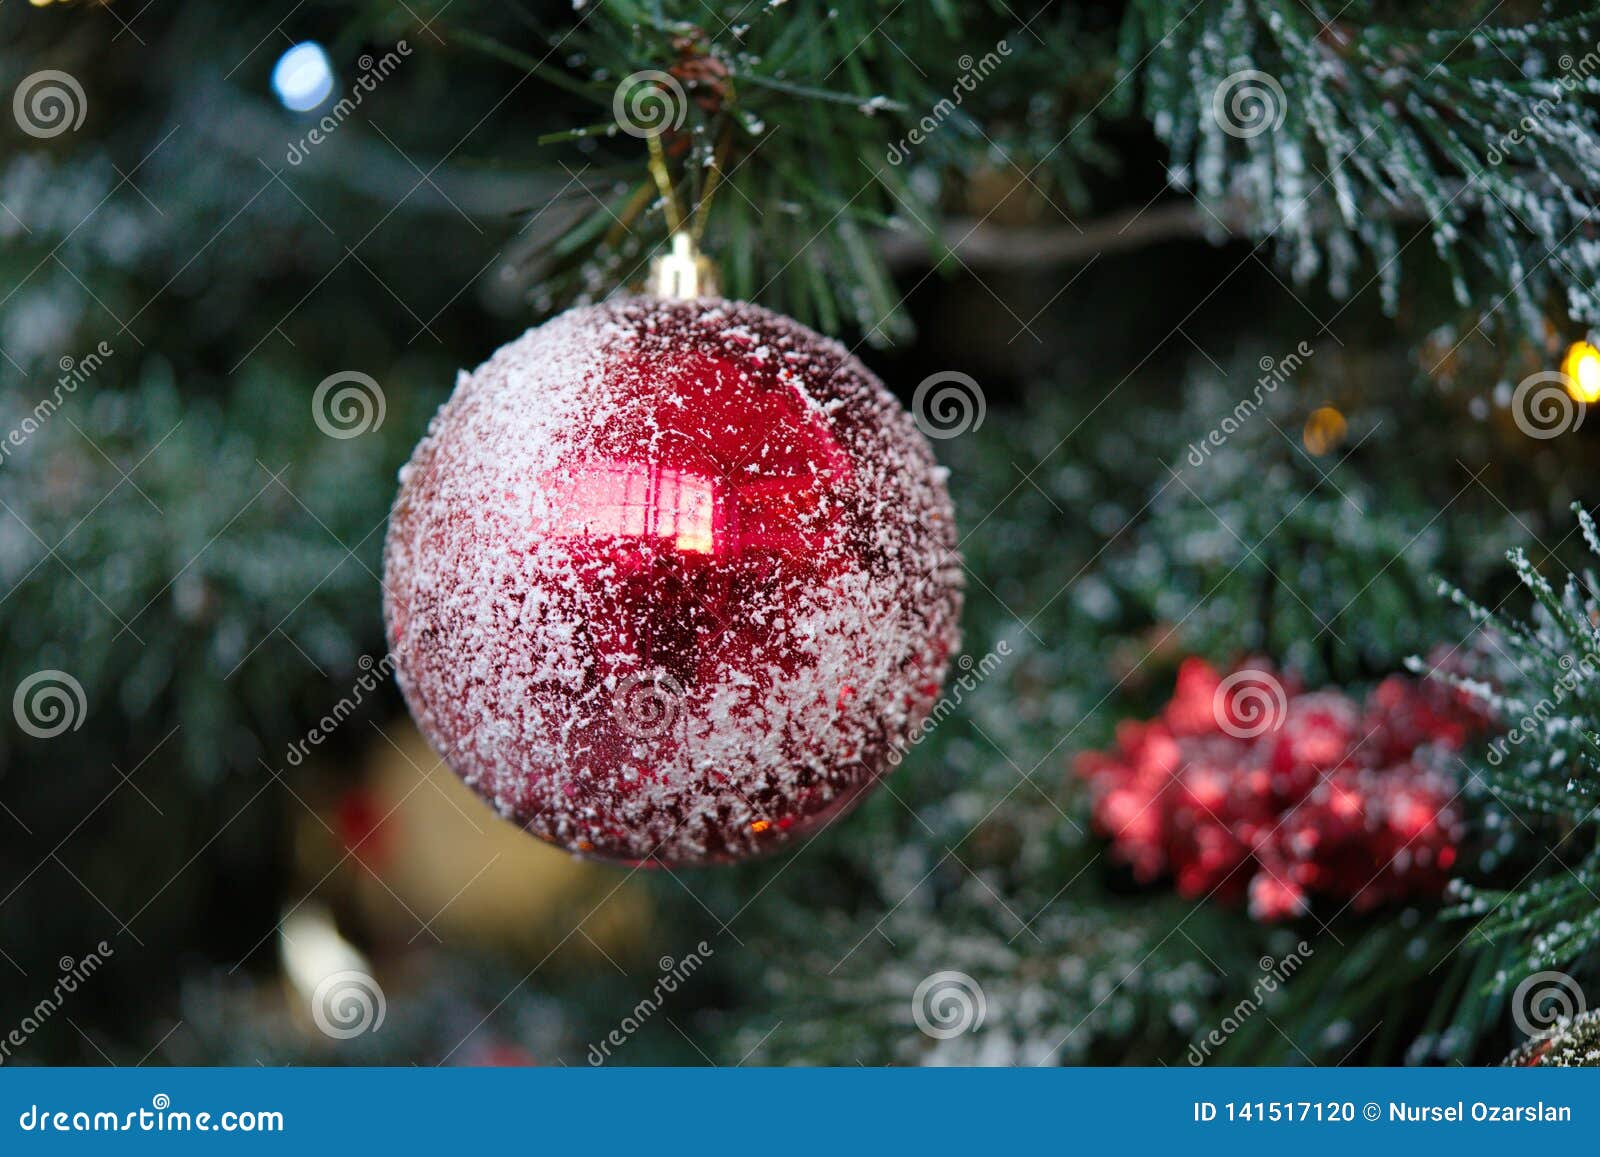 Christmas tree decorations stock photo. Image of happiness - 141517120